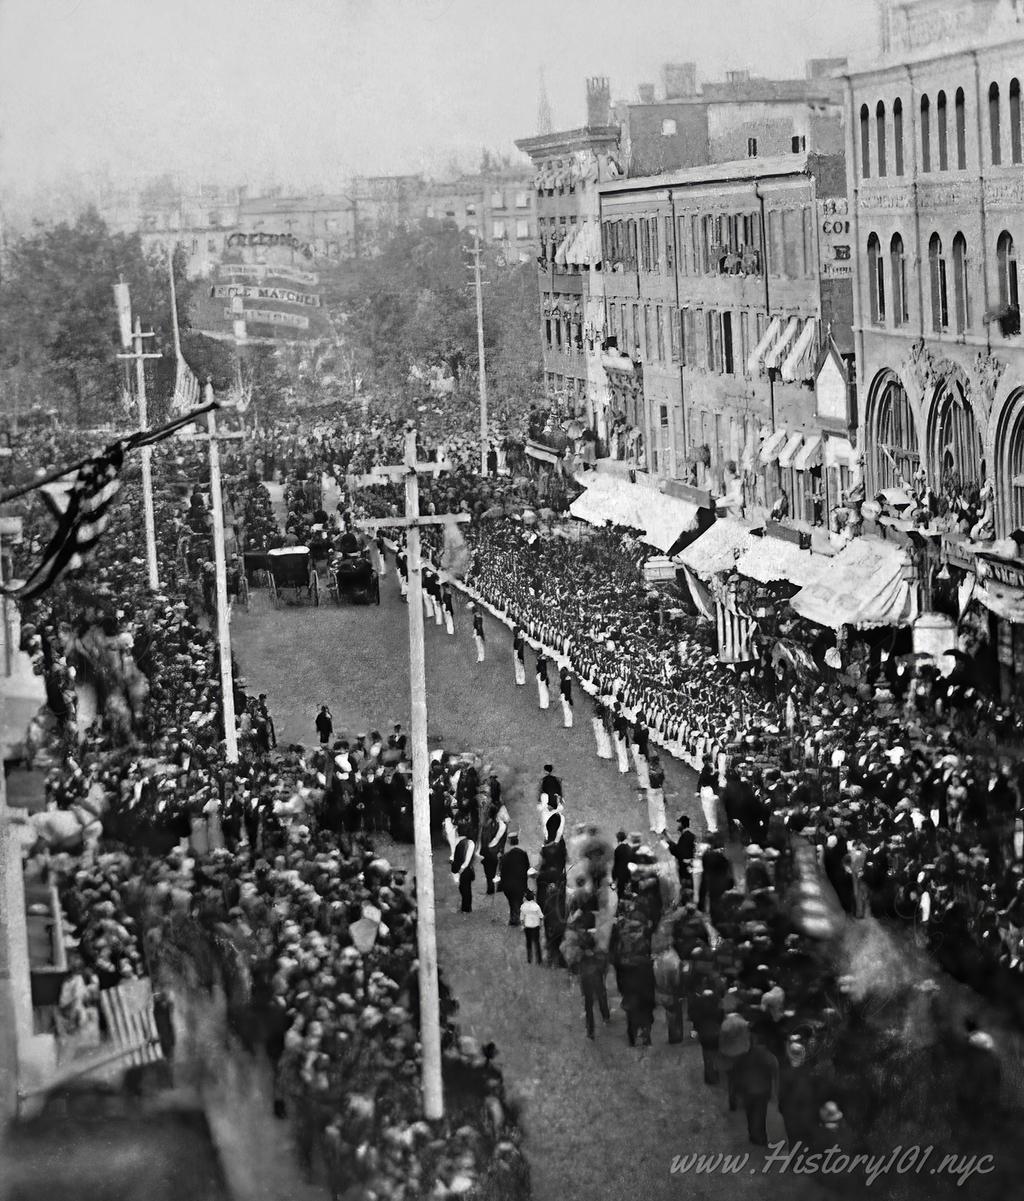 An aerial photograph shows a large crowd of spectators enjoying a parade on Broadway.